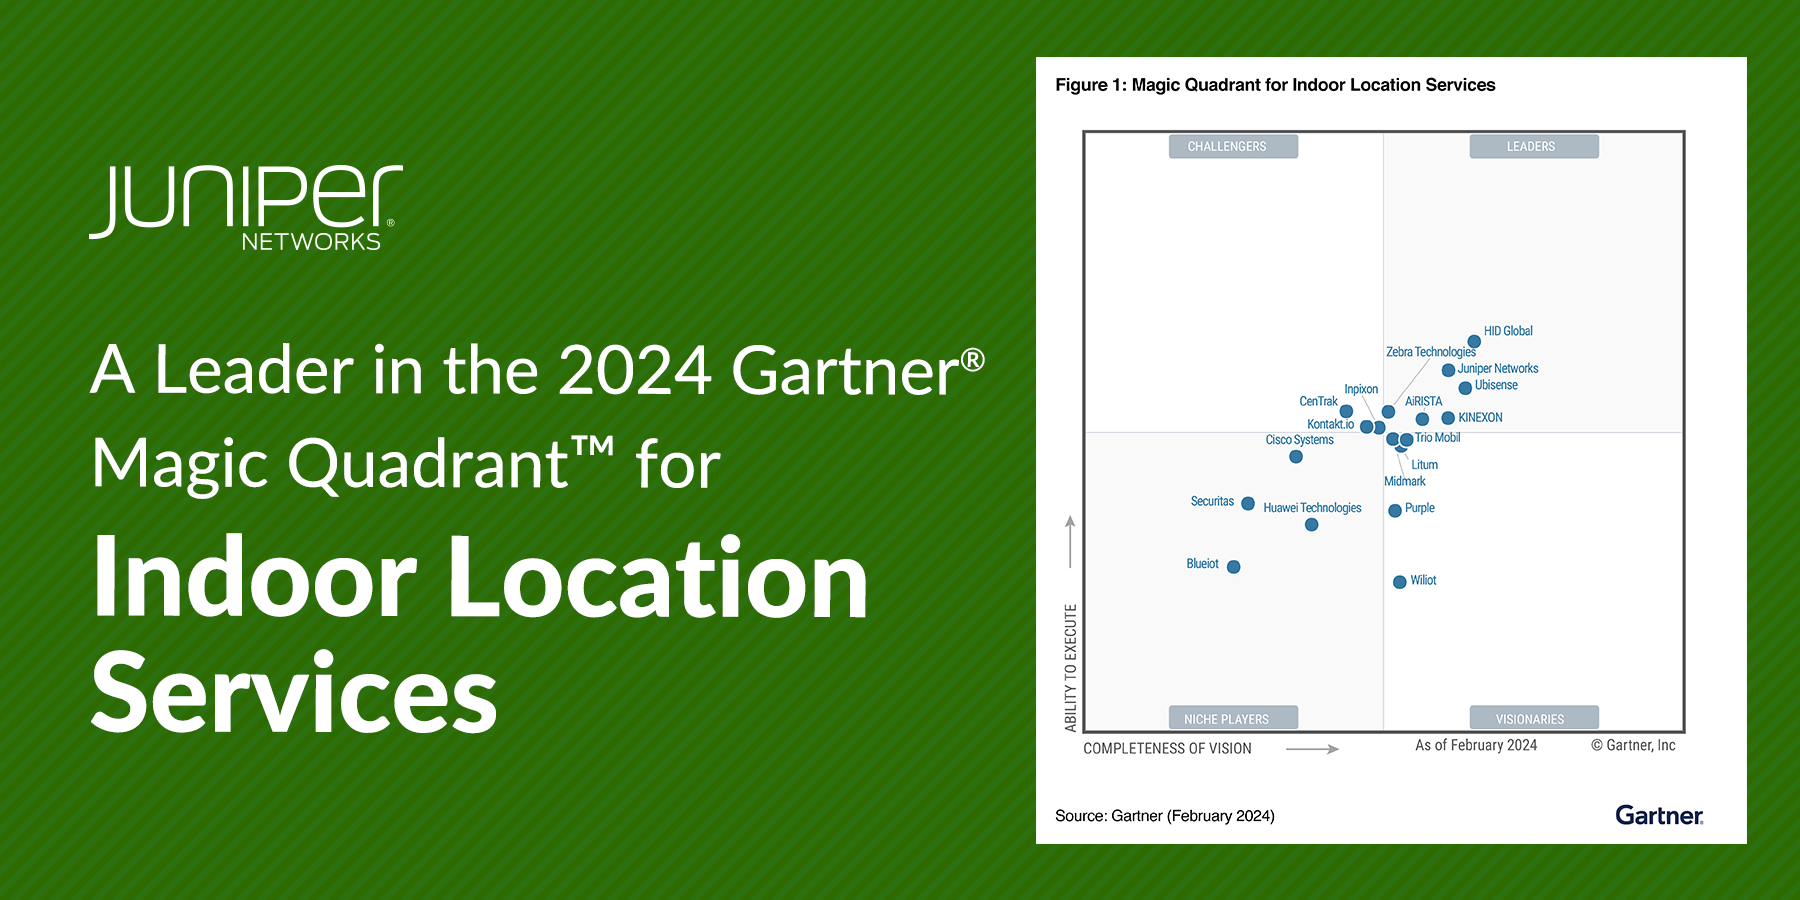 Three Years in a Row: Juniper Networks® Once Again Named a Leader in the 2024 Gartner® Magic Quadrant™ for Indoor Location Services